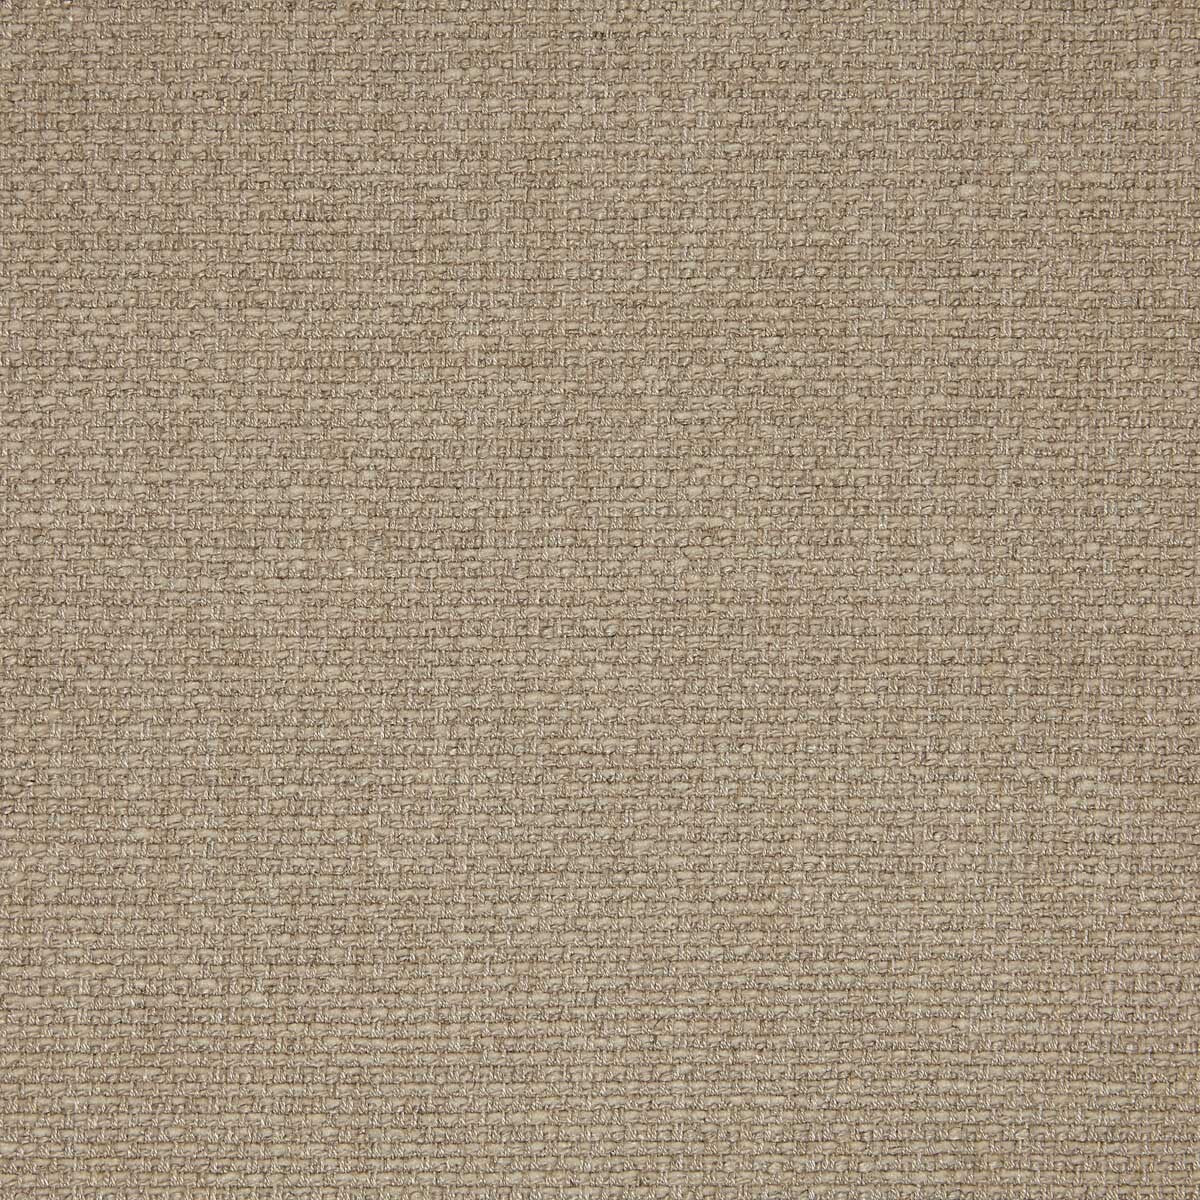 Godai fabric in 16 color - pattern LZ-30349.16.0 - by Kravet Design in the Lizzo collection